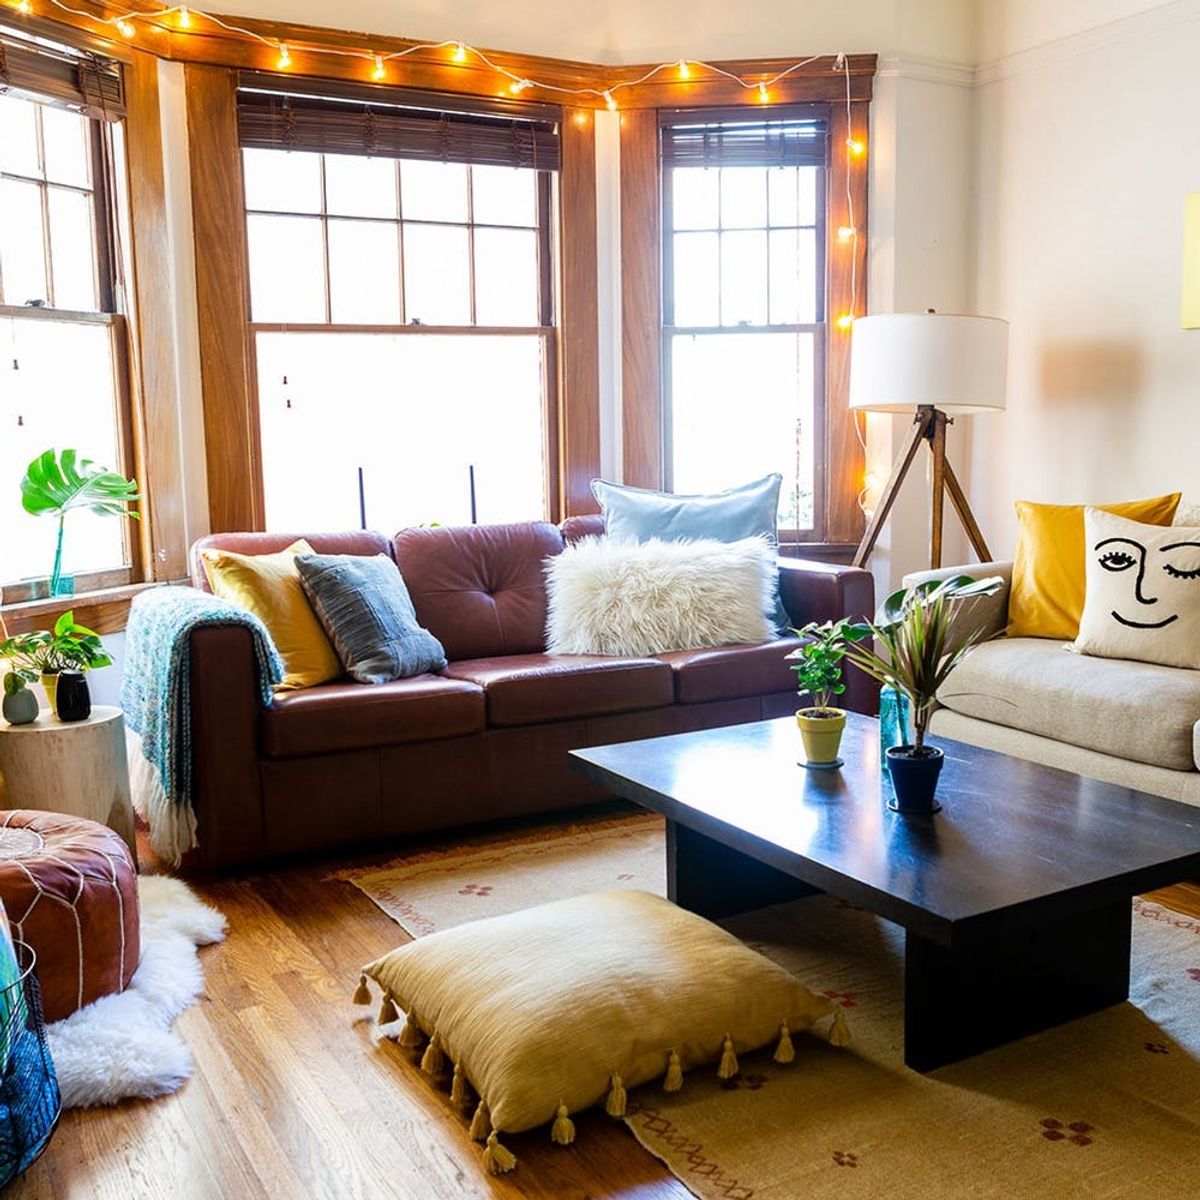 5 Easy Tips for Making Your Home Feel More Inviting